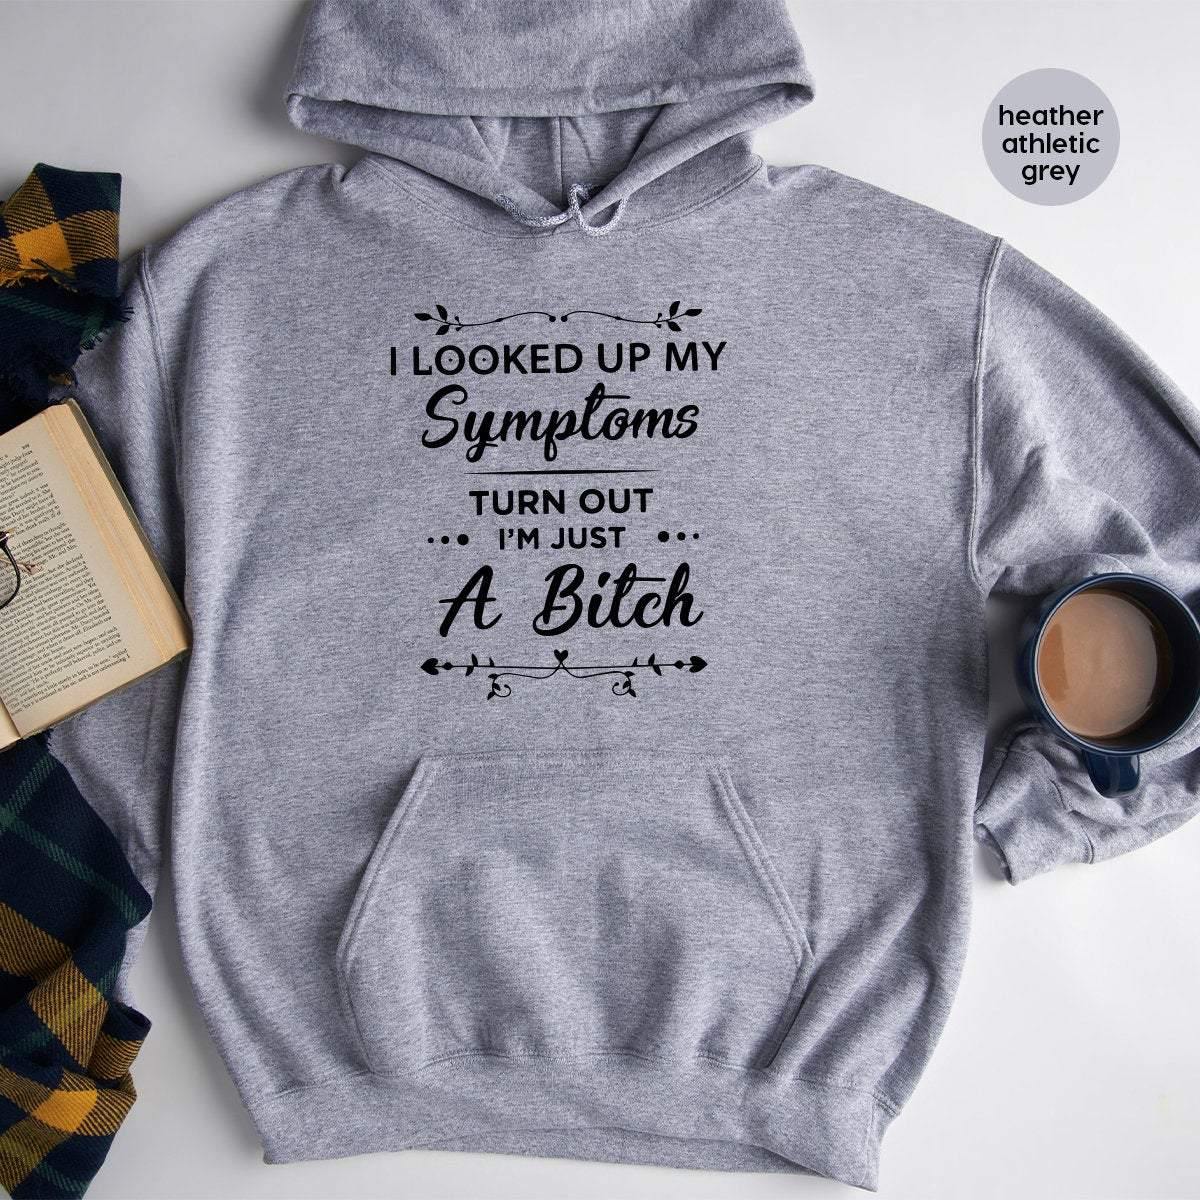 Funny Women Hoodie, I Am Just A Bitch Hoodie, Sassy Hoodie, Bad Bitch Hoodies, Bad Girl Hoodie, Gift For Women, Looked Up My Symptoms Shirt - Fastdeliverytees.com